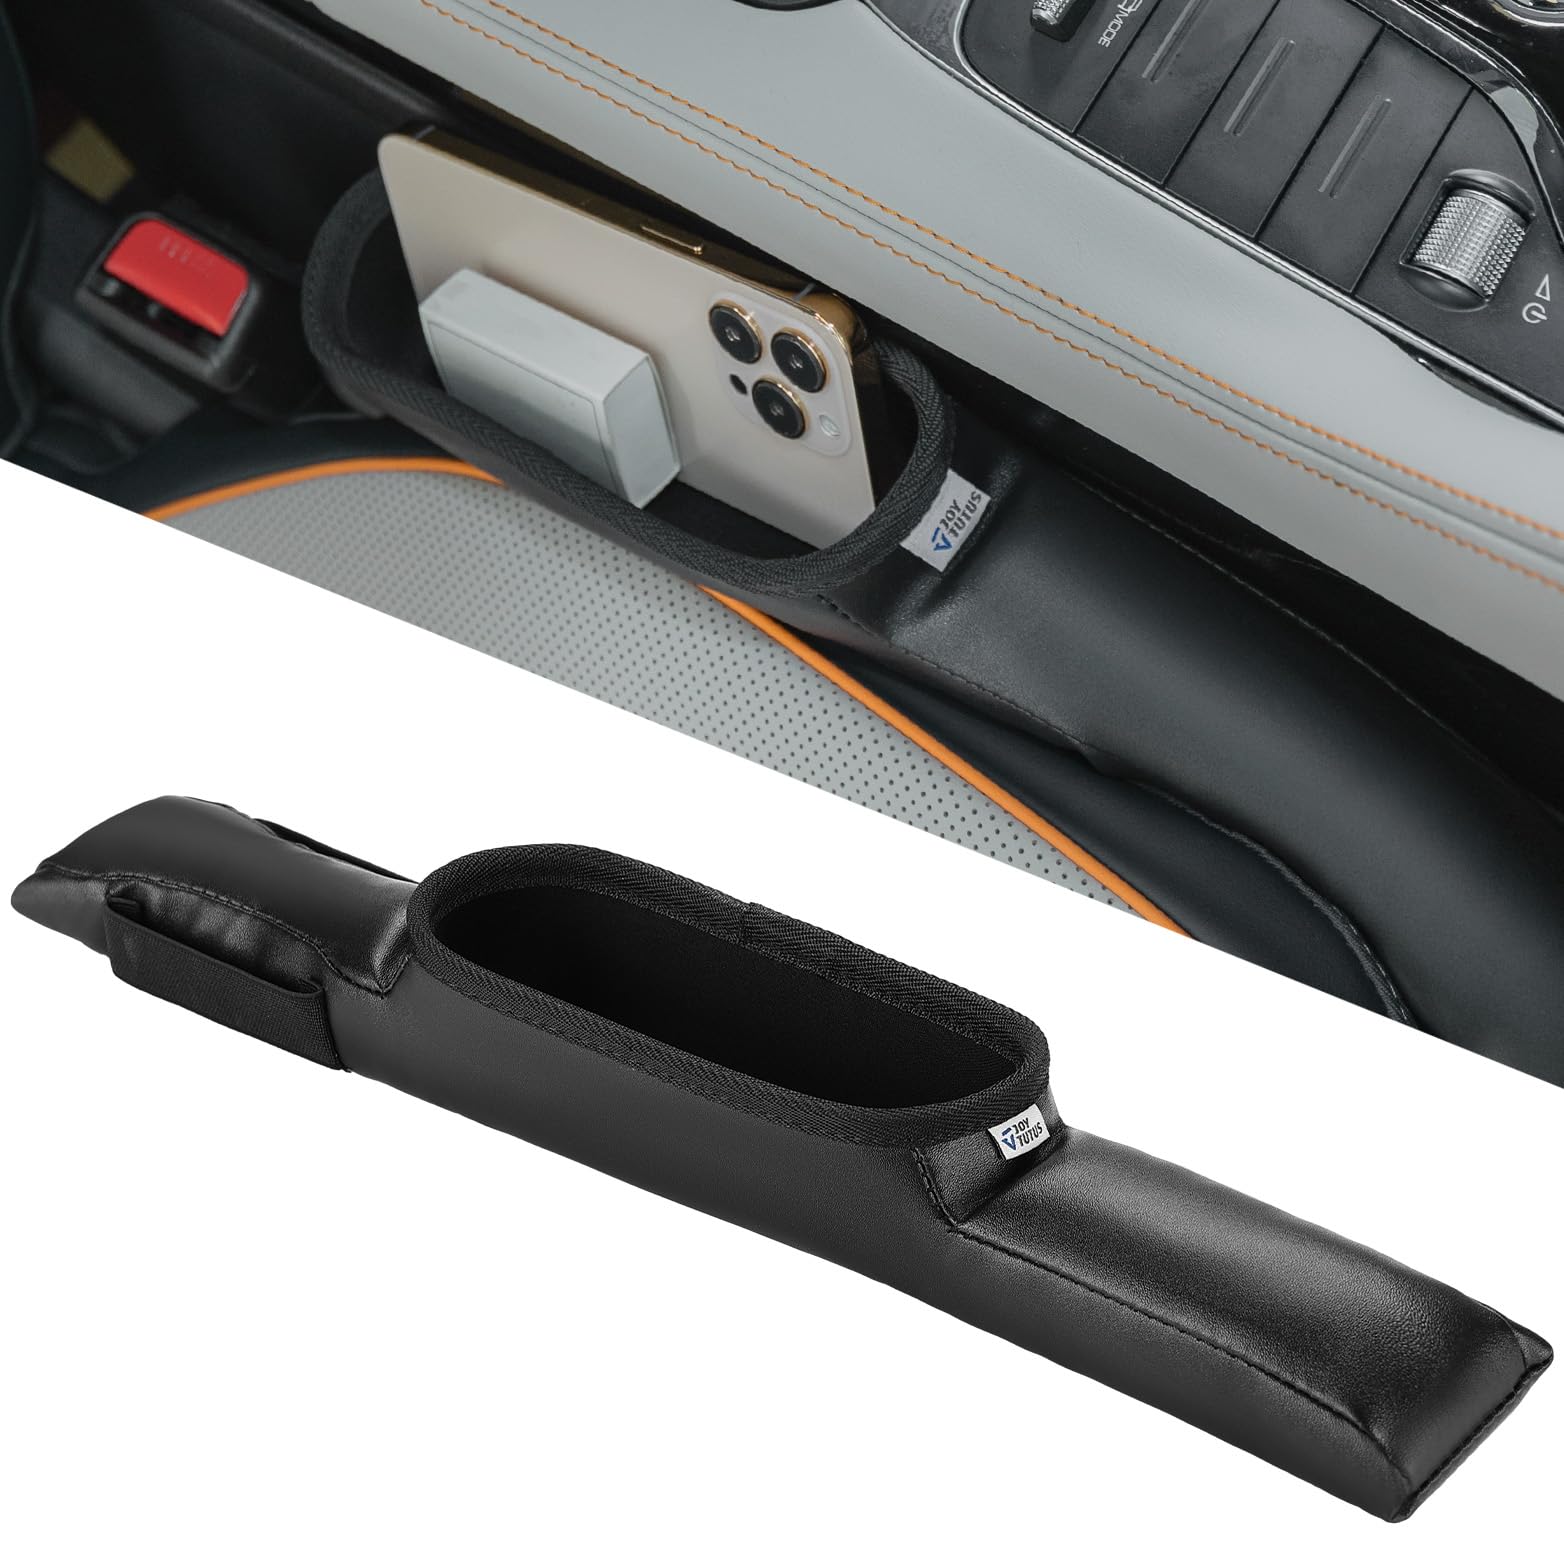 Axutous Car Seat Gap Filler Universal for Car SUV Truck Fit Organizer  Accessories Fill The Gap Between Seat and Console Stop Things from Dropping  Pack